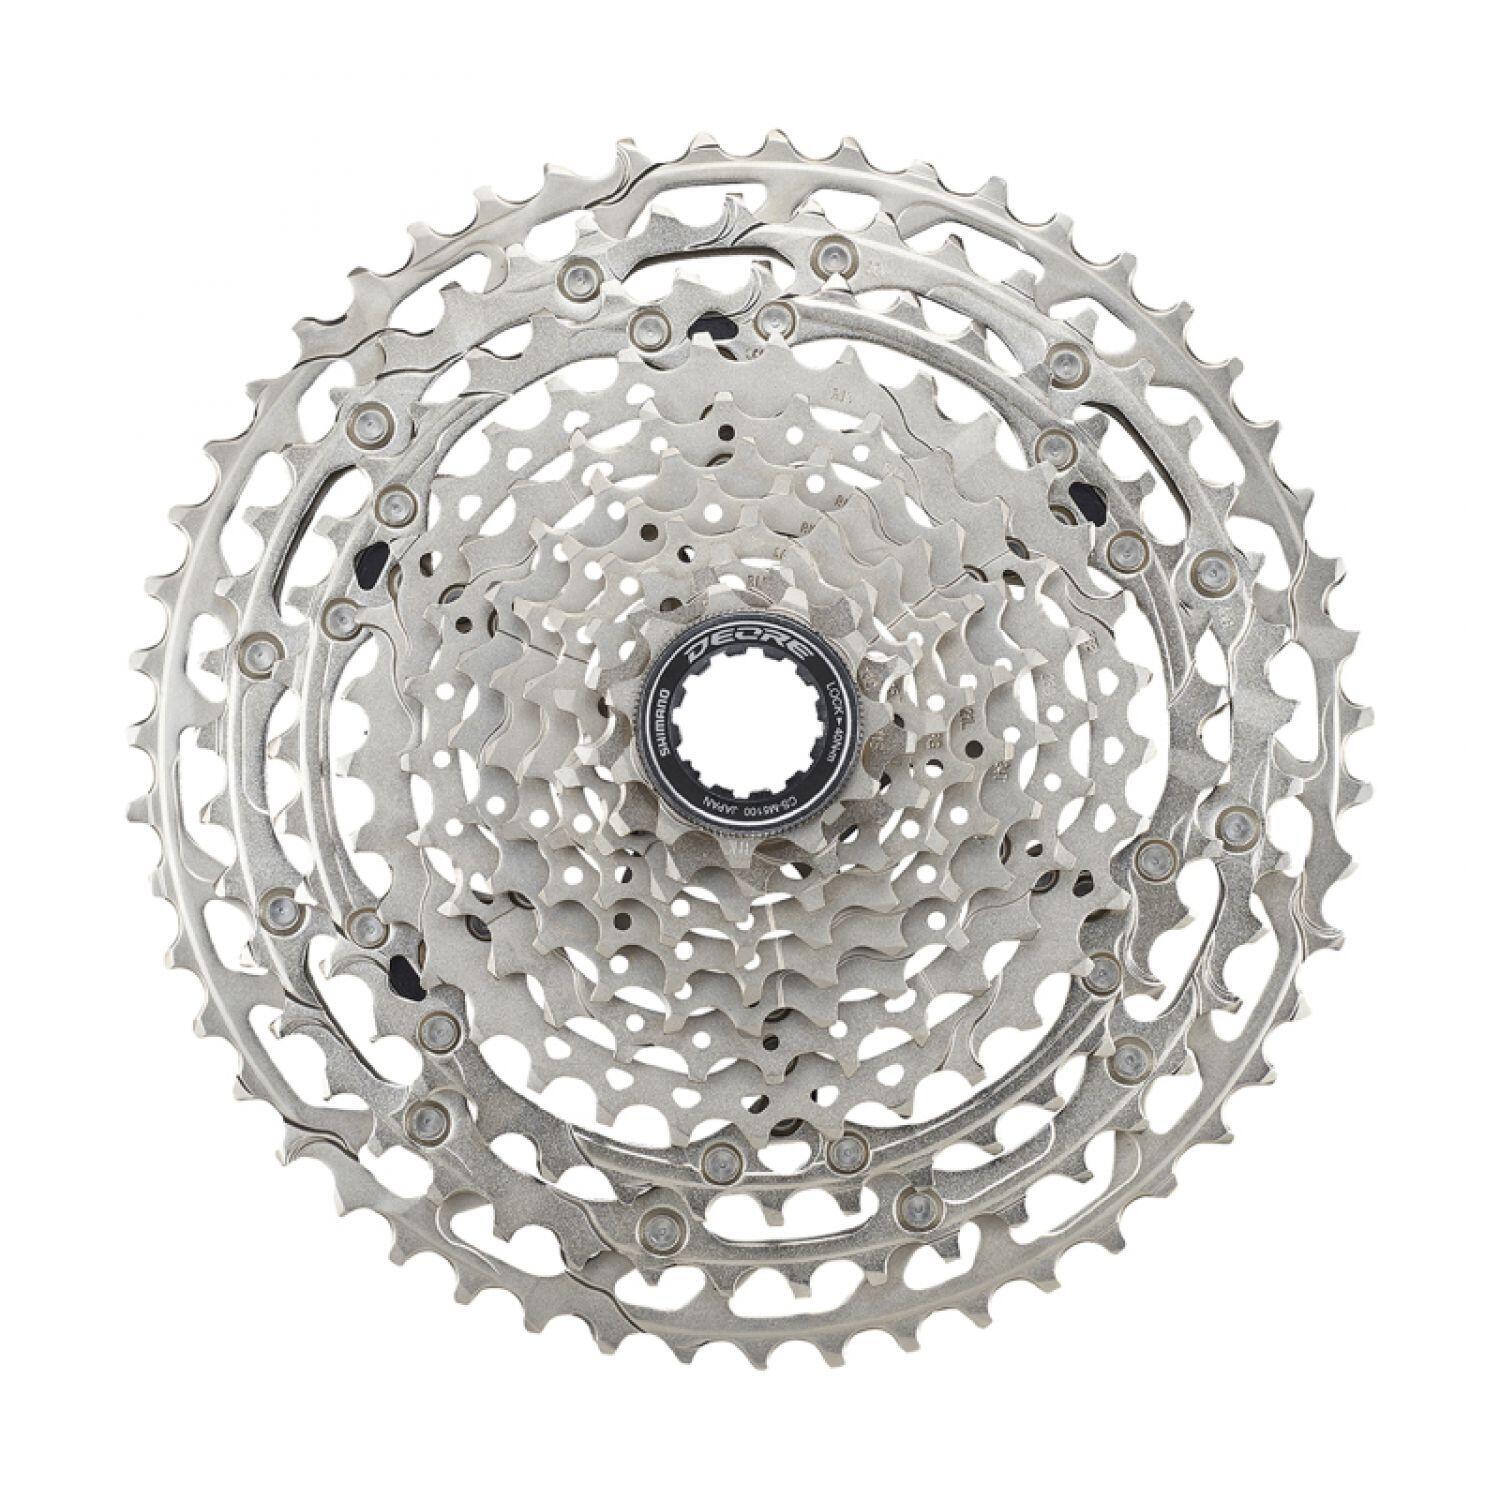 SHIMANO Shimano Deore M5100 11 speed Cassette 11-51T